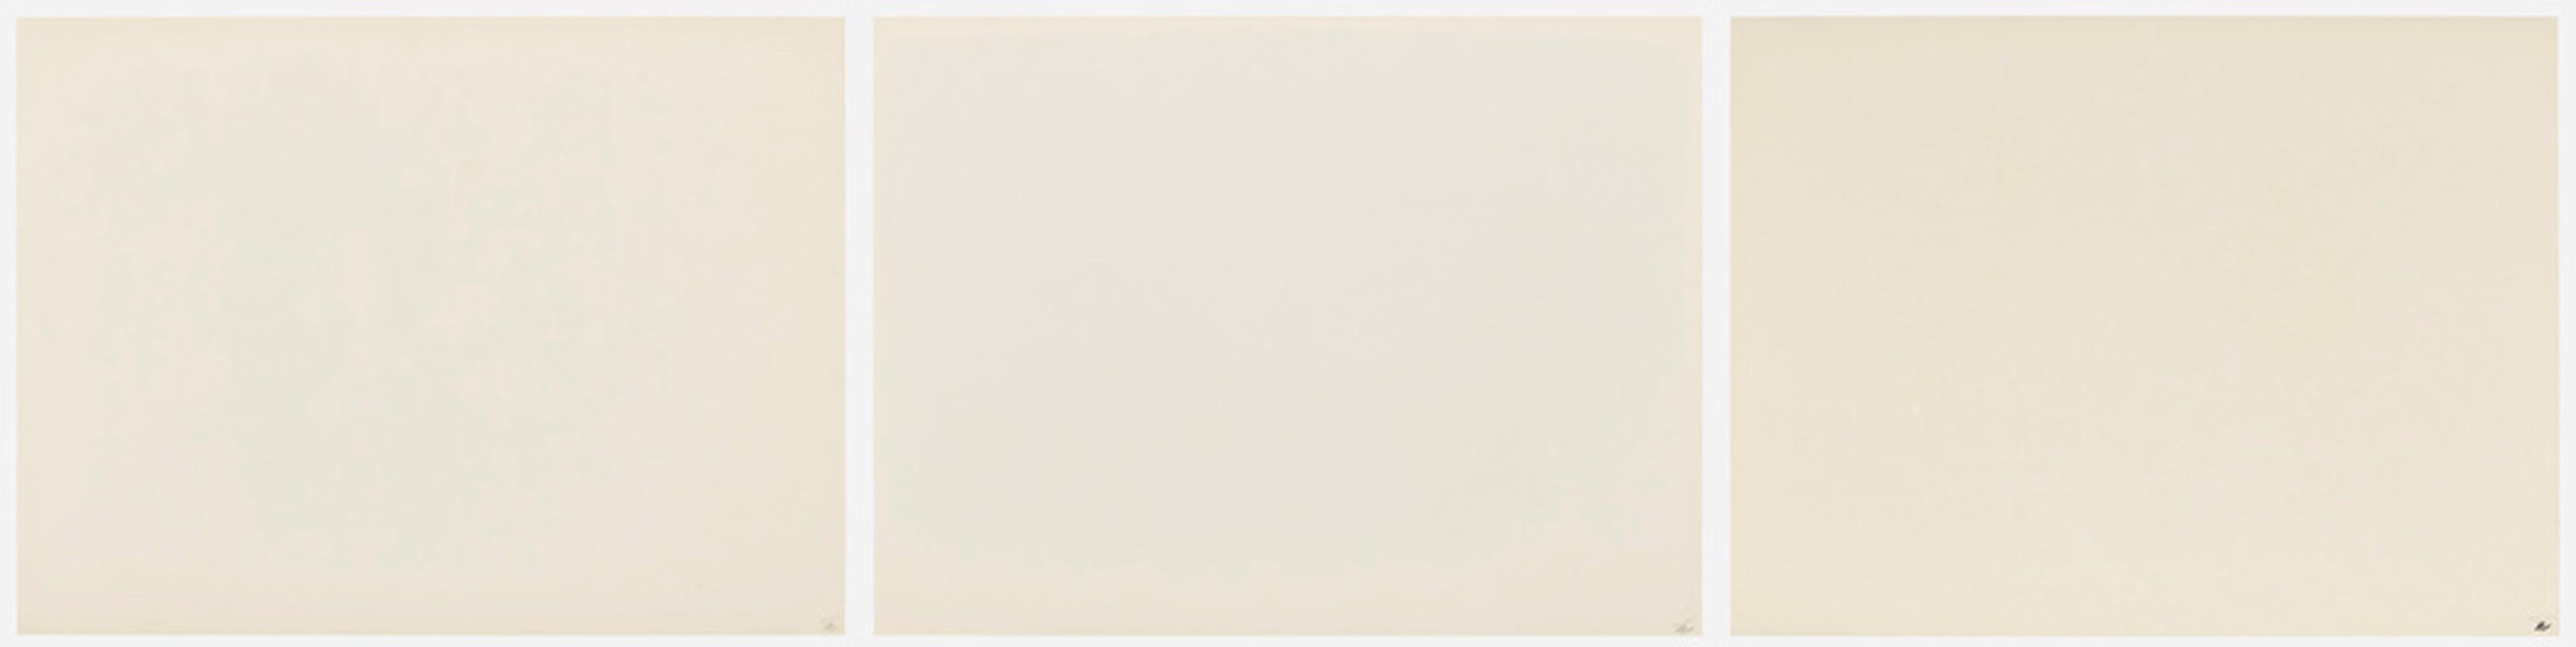 Ed Ruscha 'Suds' Suite of Three Screenprints 1971 For Sale 1